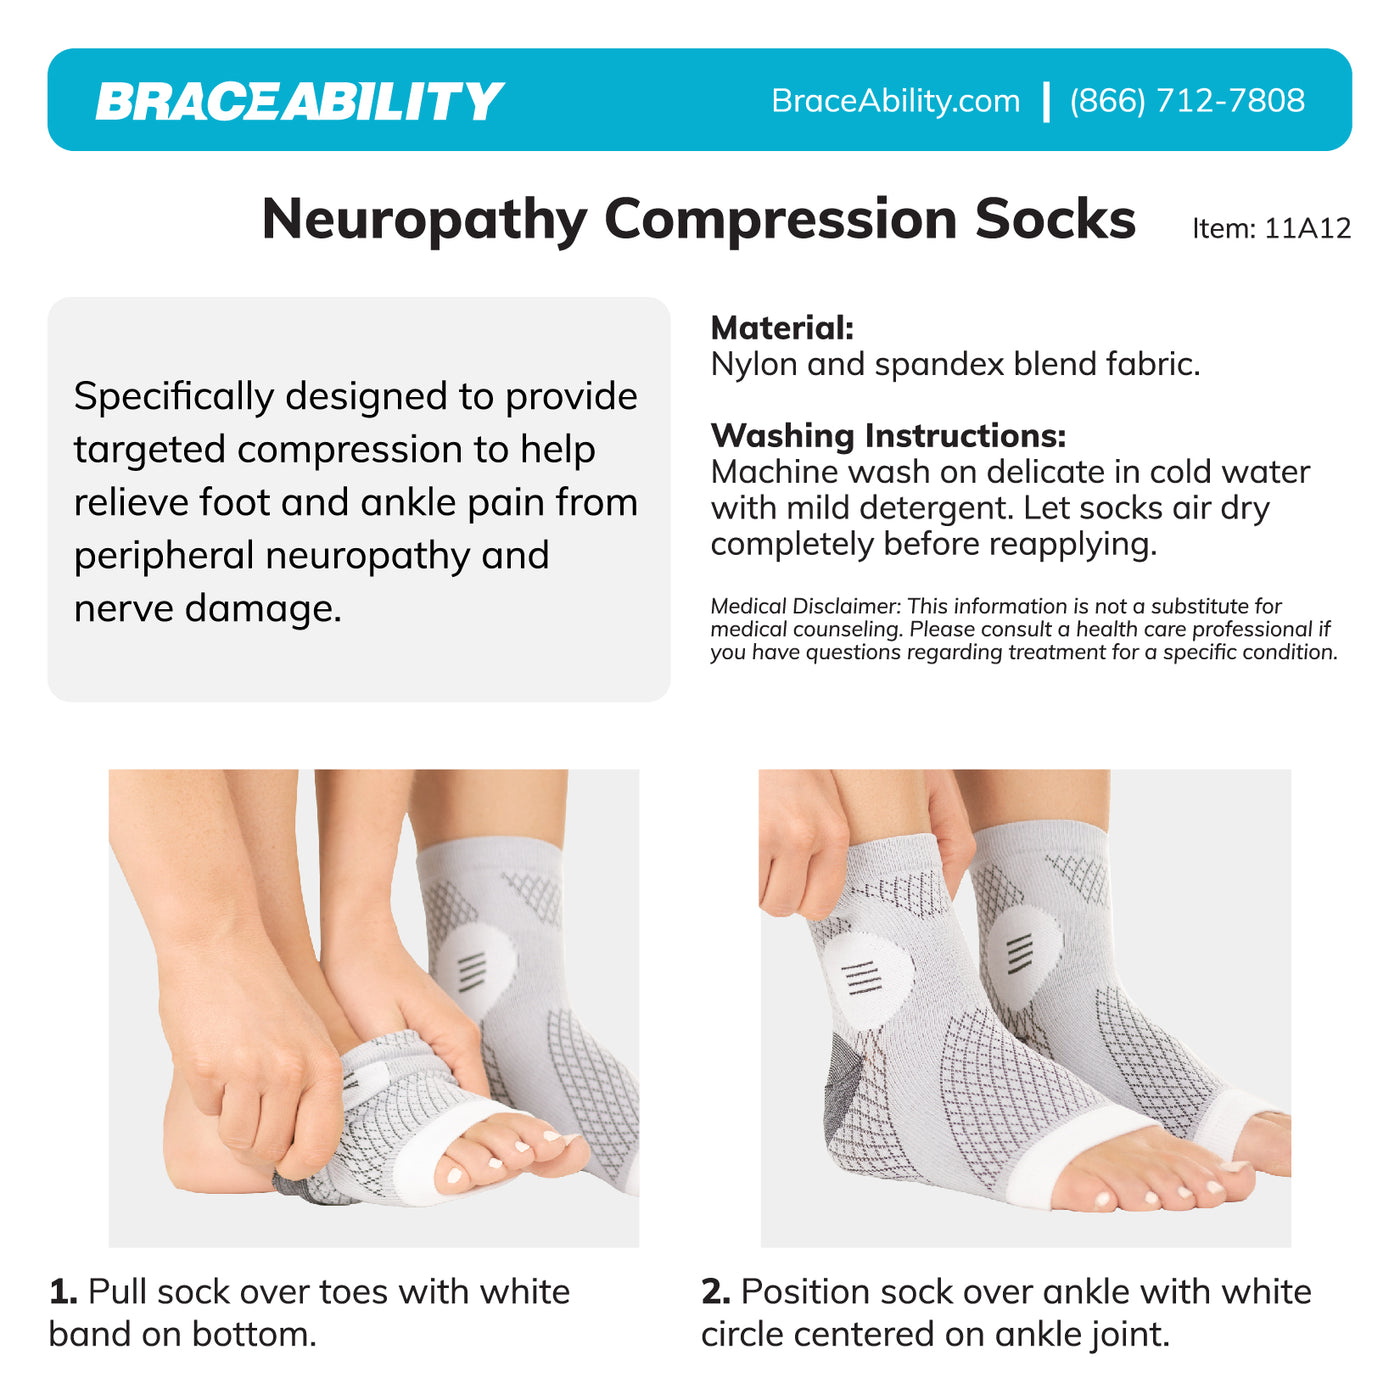 To put on the neuropathy compression socks, slide over toes and center on ankle